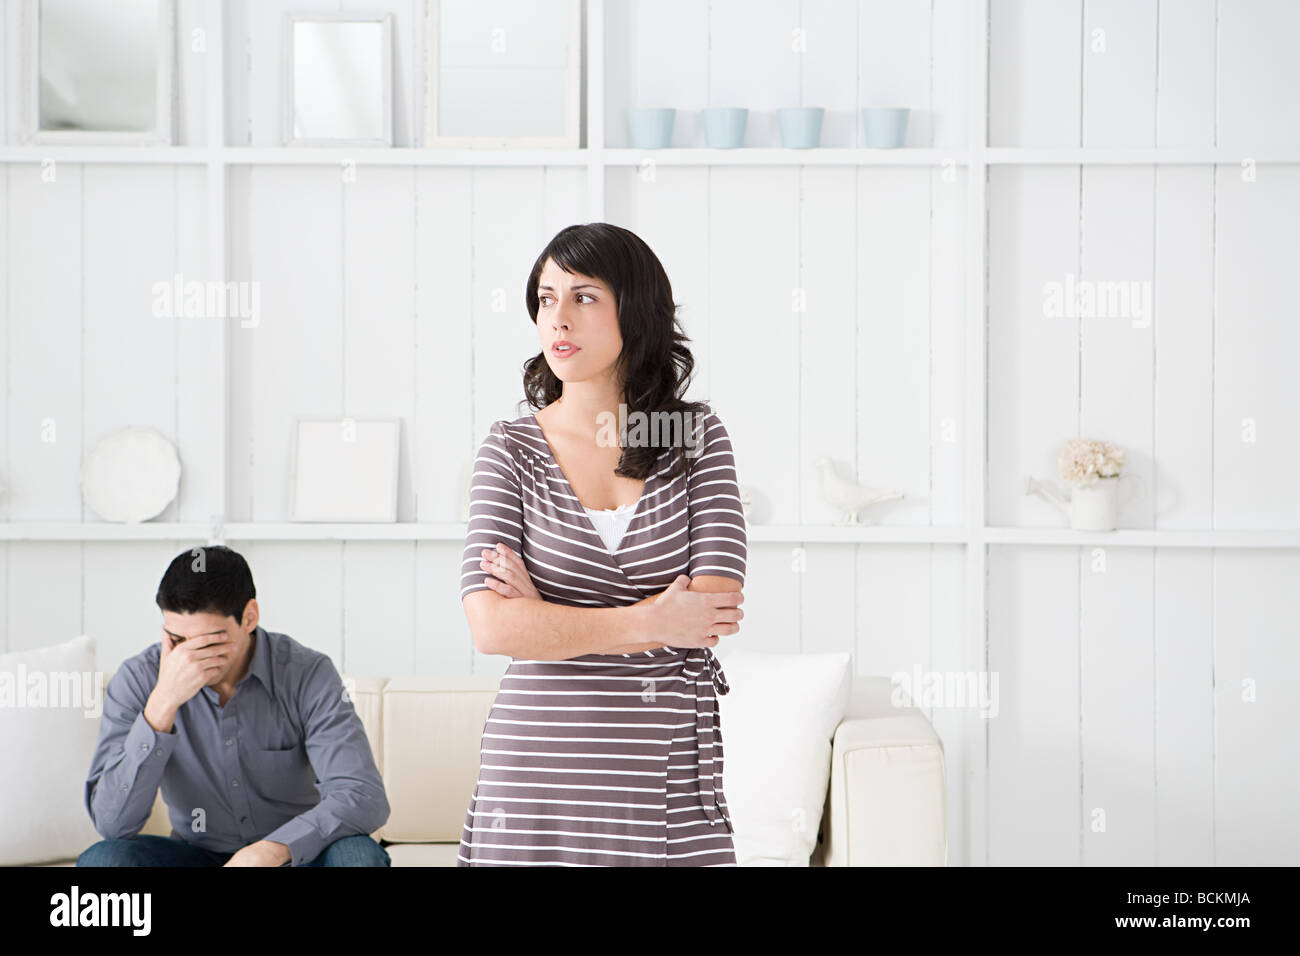 Couple having relationship difficulties Stock Photo